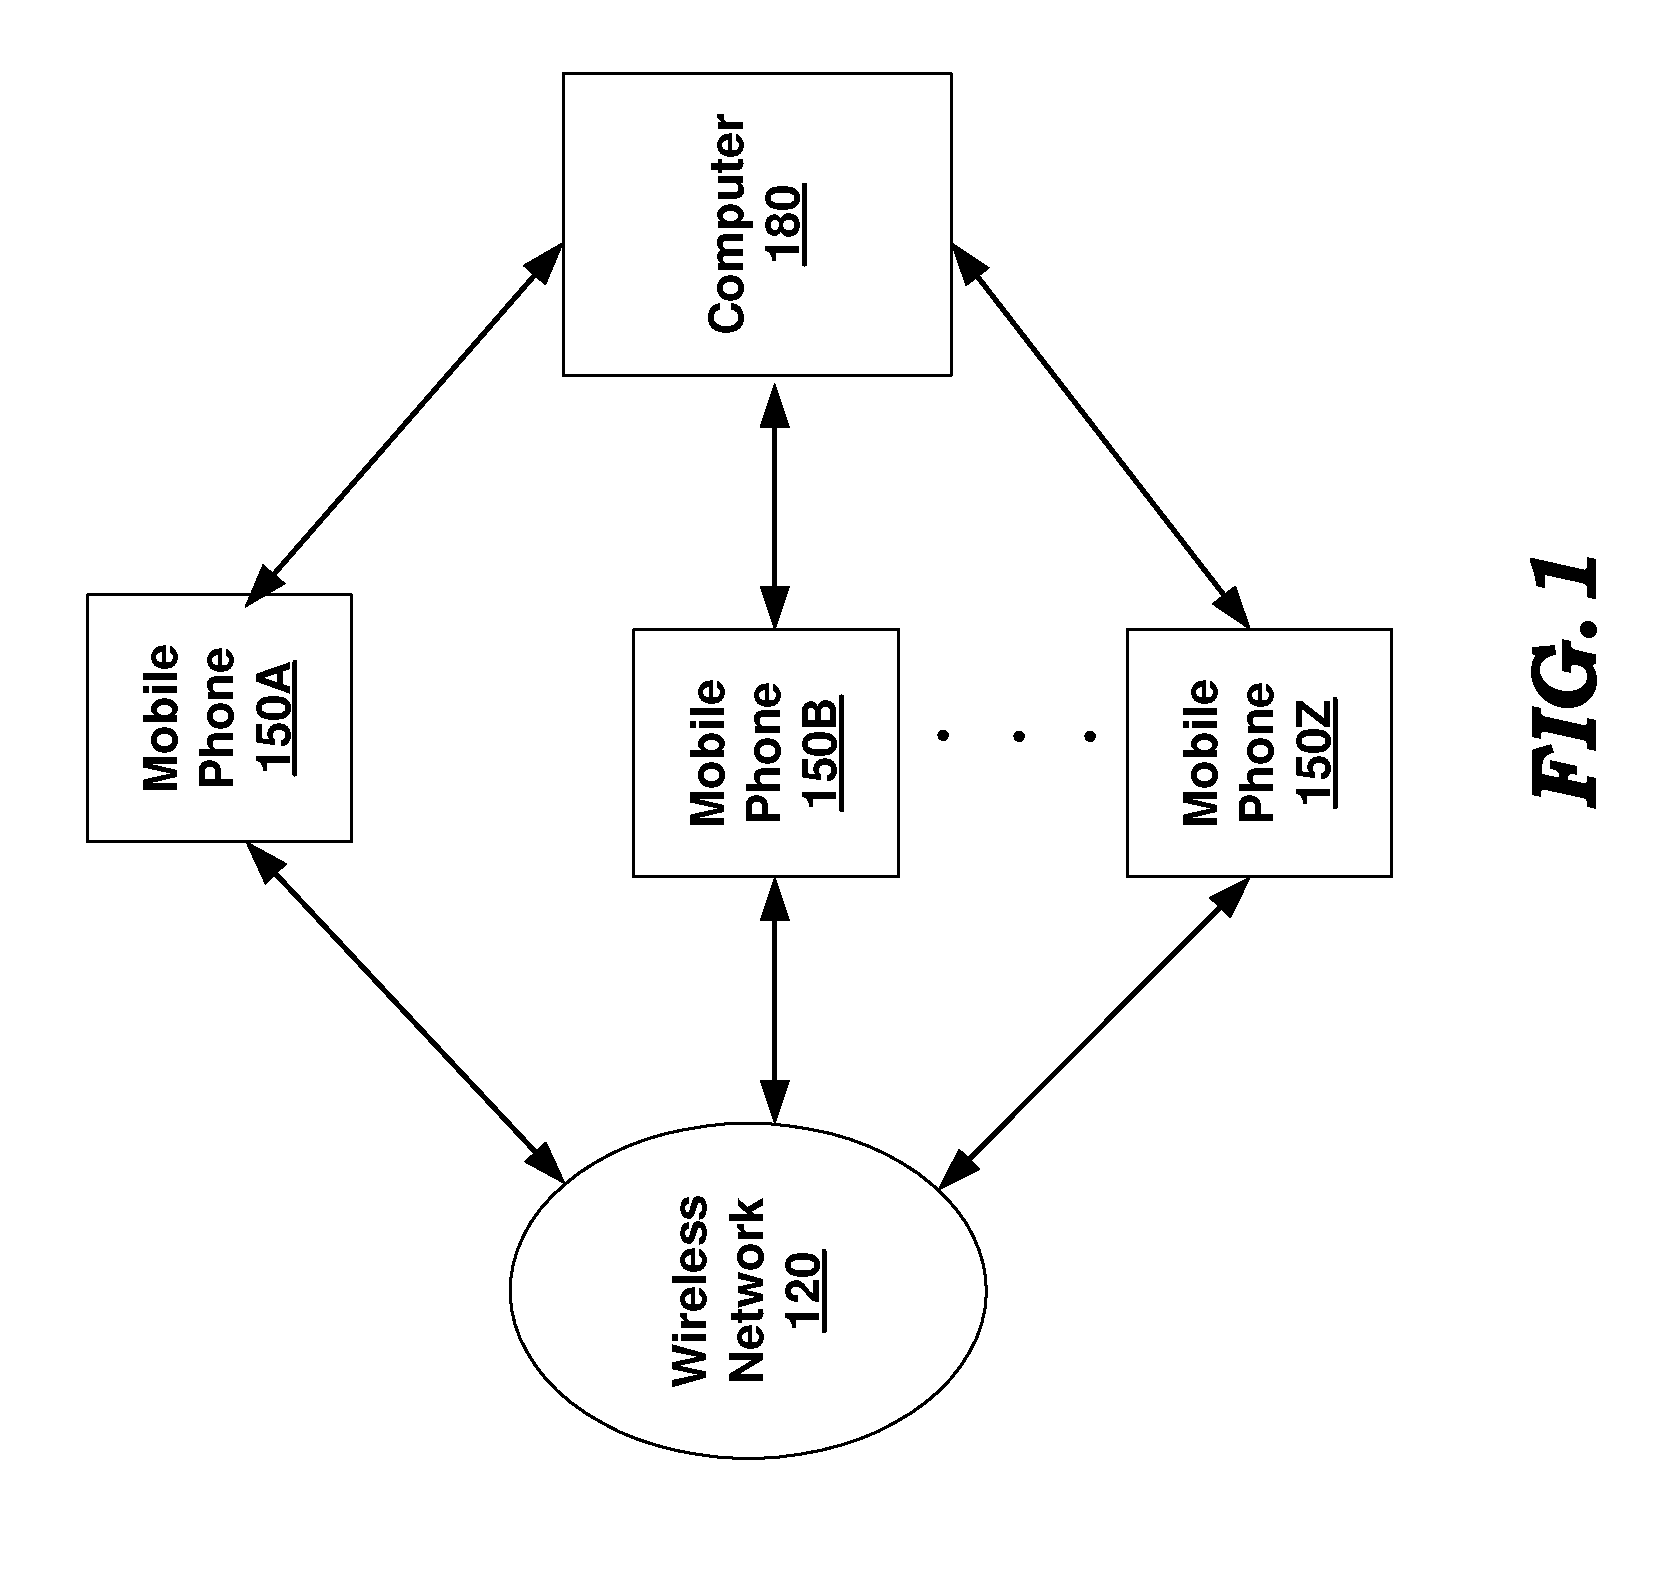 Virus Detection in Mobile Devices Having Insufficient Resources to Execute Virus Detection Software